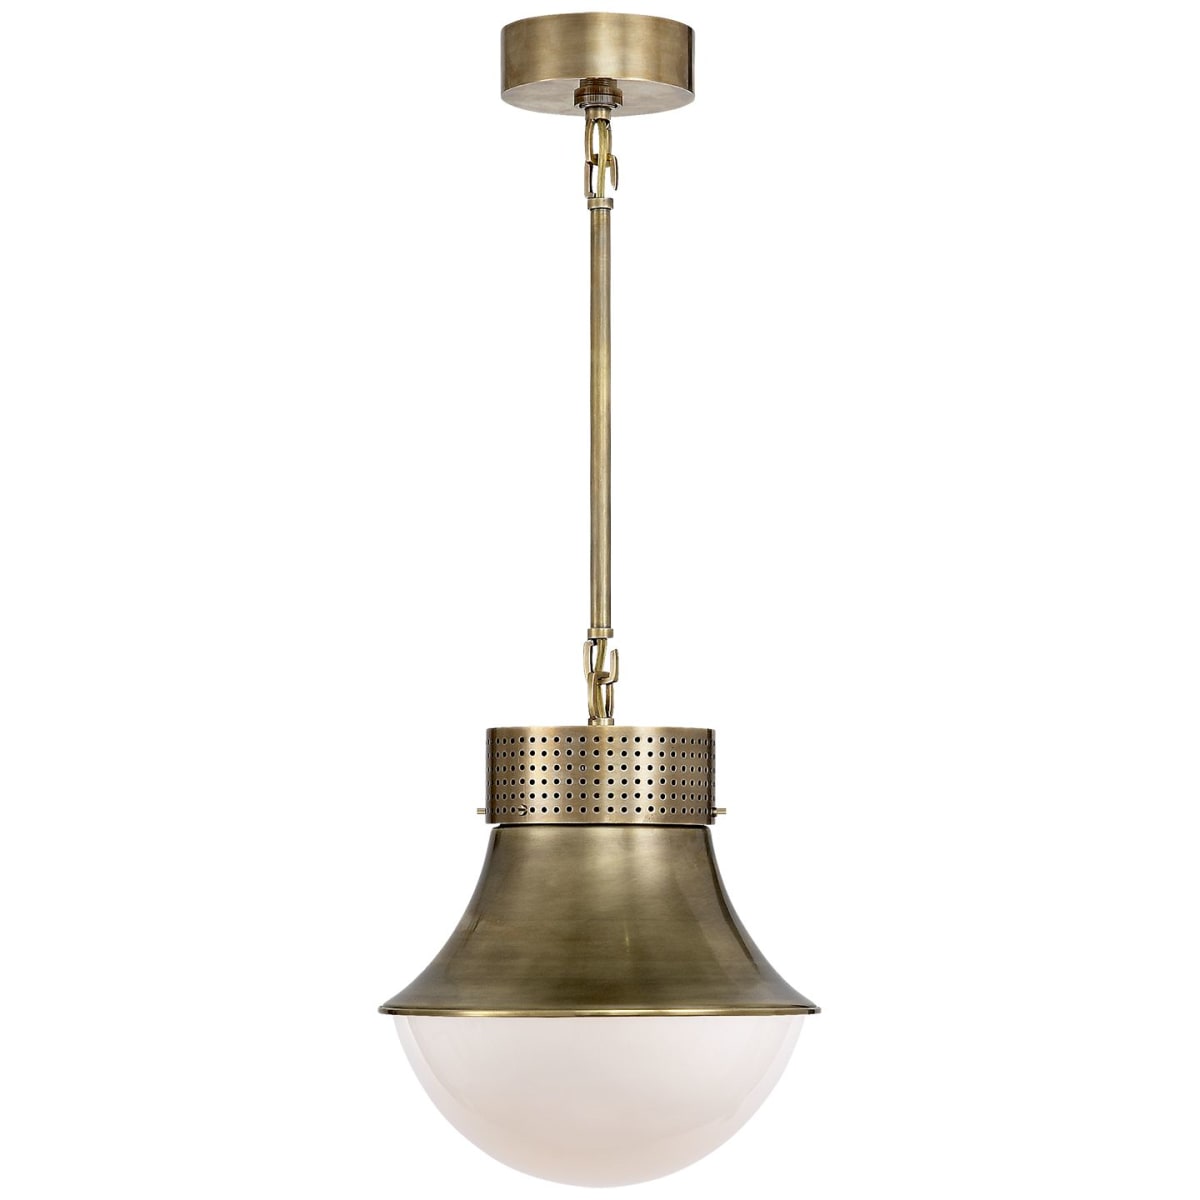 EF CHAPMAN for VISUAL COMFORT Zodiac Pendant Light in Antiqued